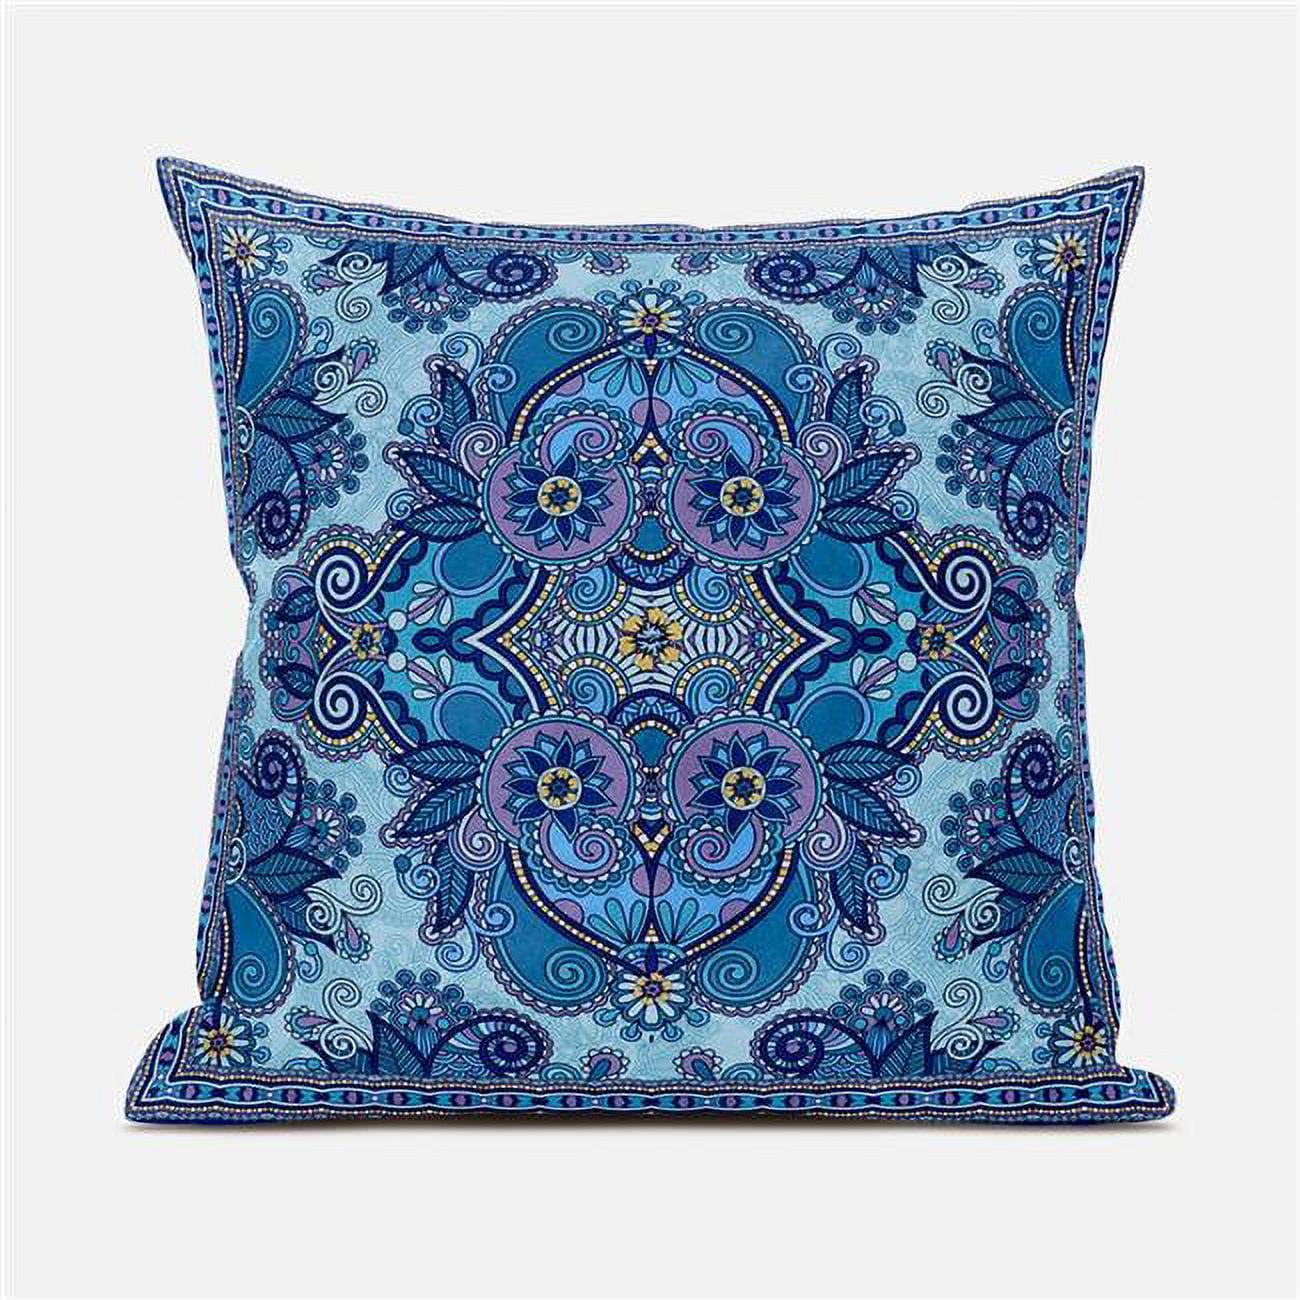 Picture of Amrita Sen Designs CAPL1004FSDS-ZP-18x18 18 x 18 in. Floral Paisley Suede Zippered Pillow with Insert - Blue & Purple